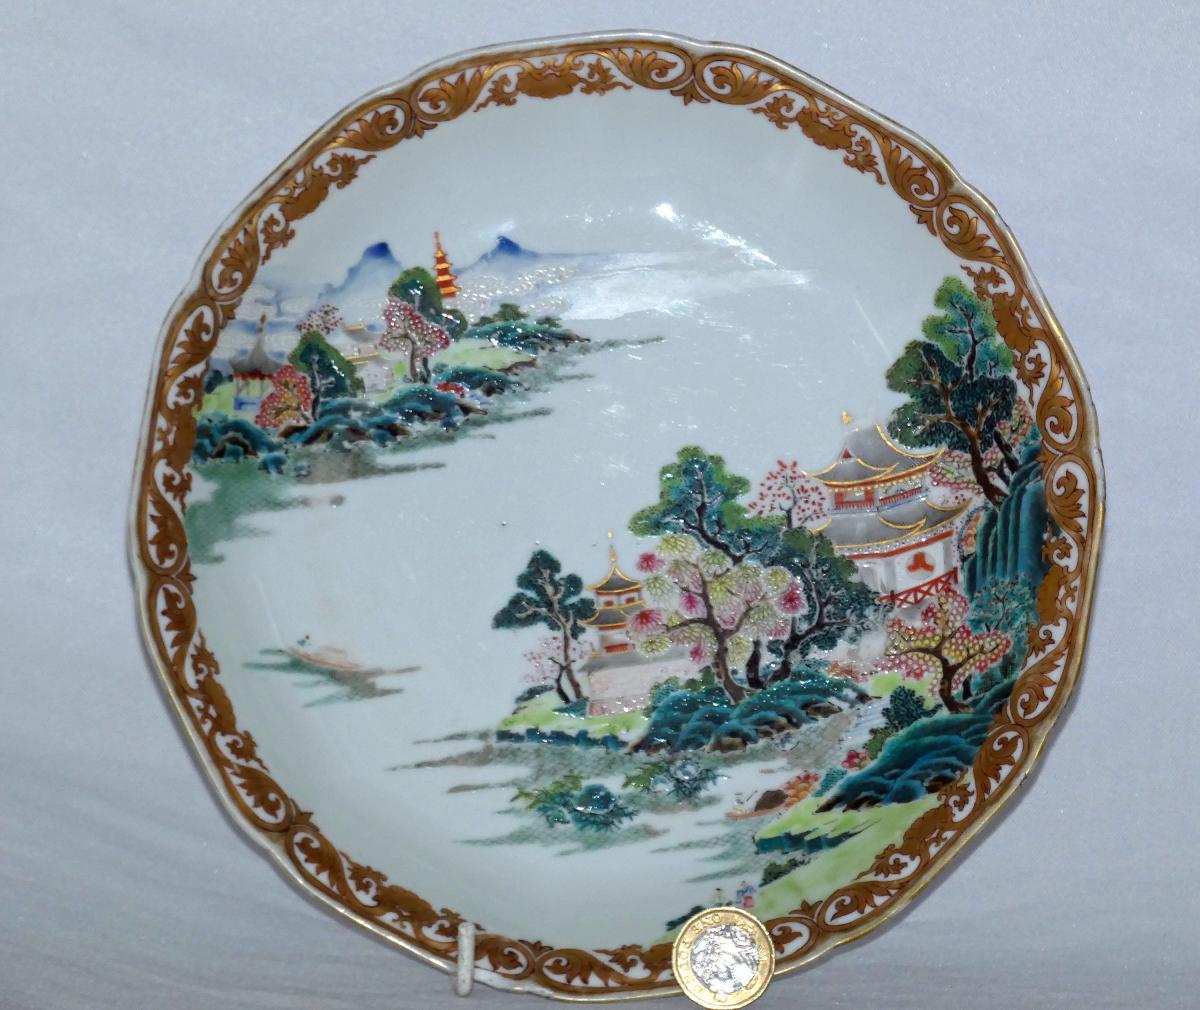 Chinese Famille Rose Shaped Plate circa 1750